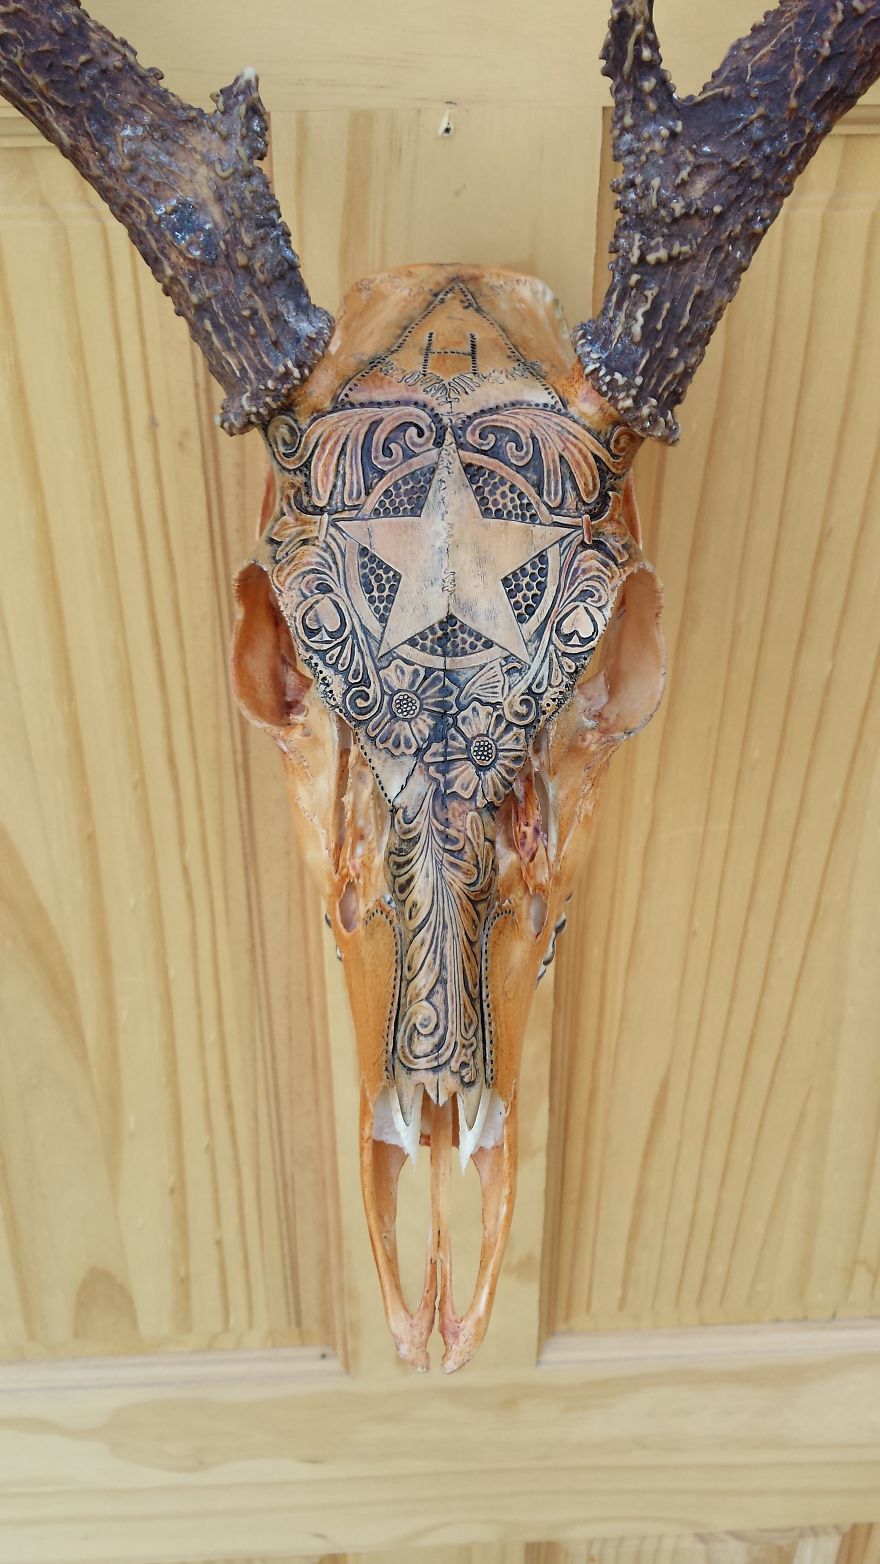 Western Style Deer Skull Carving I Carved With A Dremel